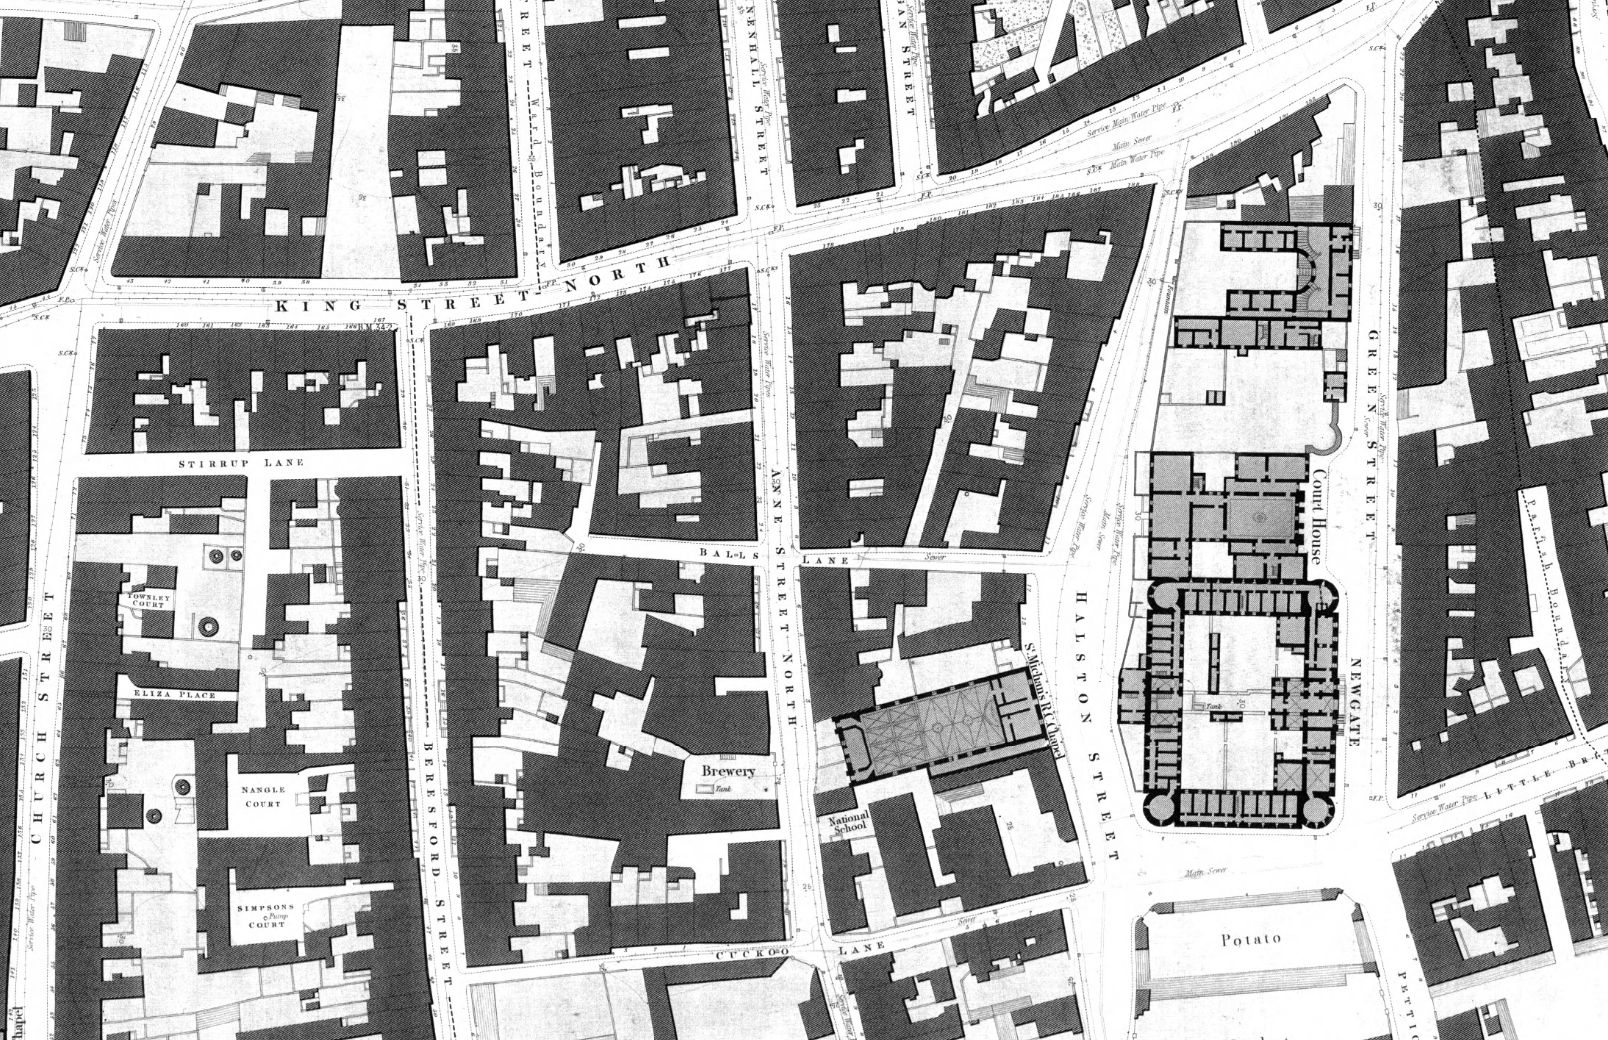 Ordnance Survey map of Dublin, 1847 showing the location of 'New' Newgate Prison, the City Marshalsea and Sheriff's Debtors' Prison